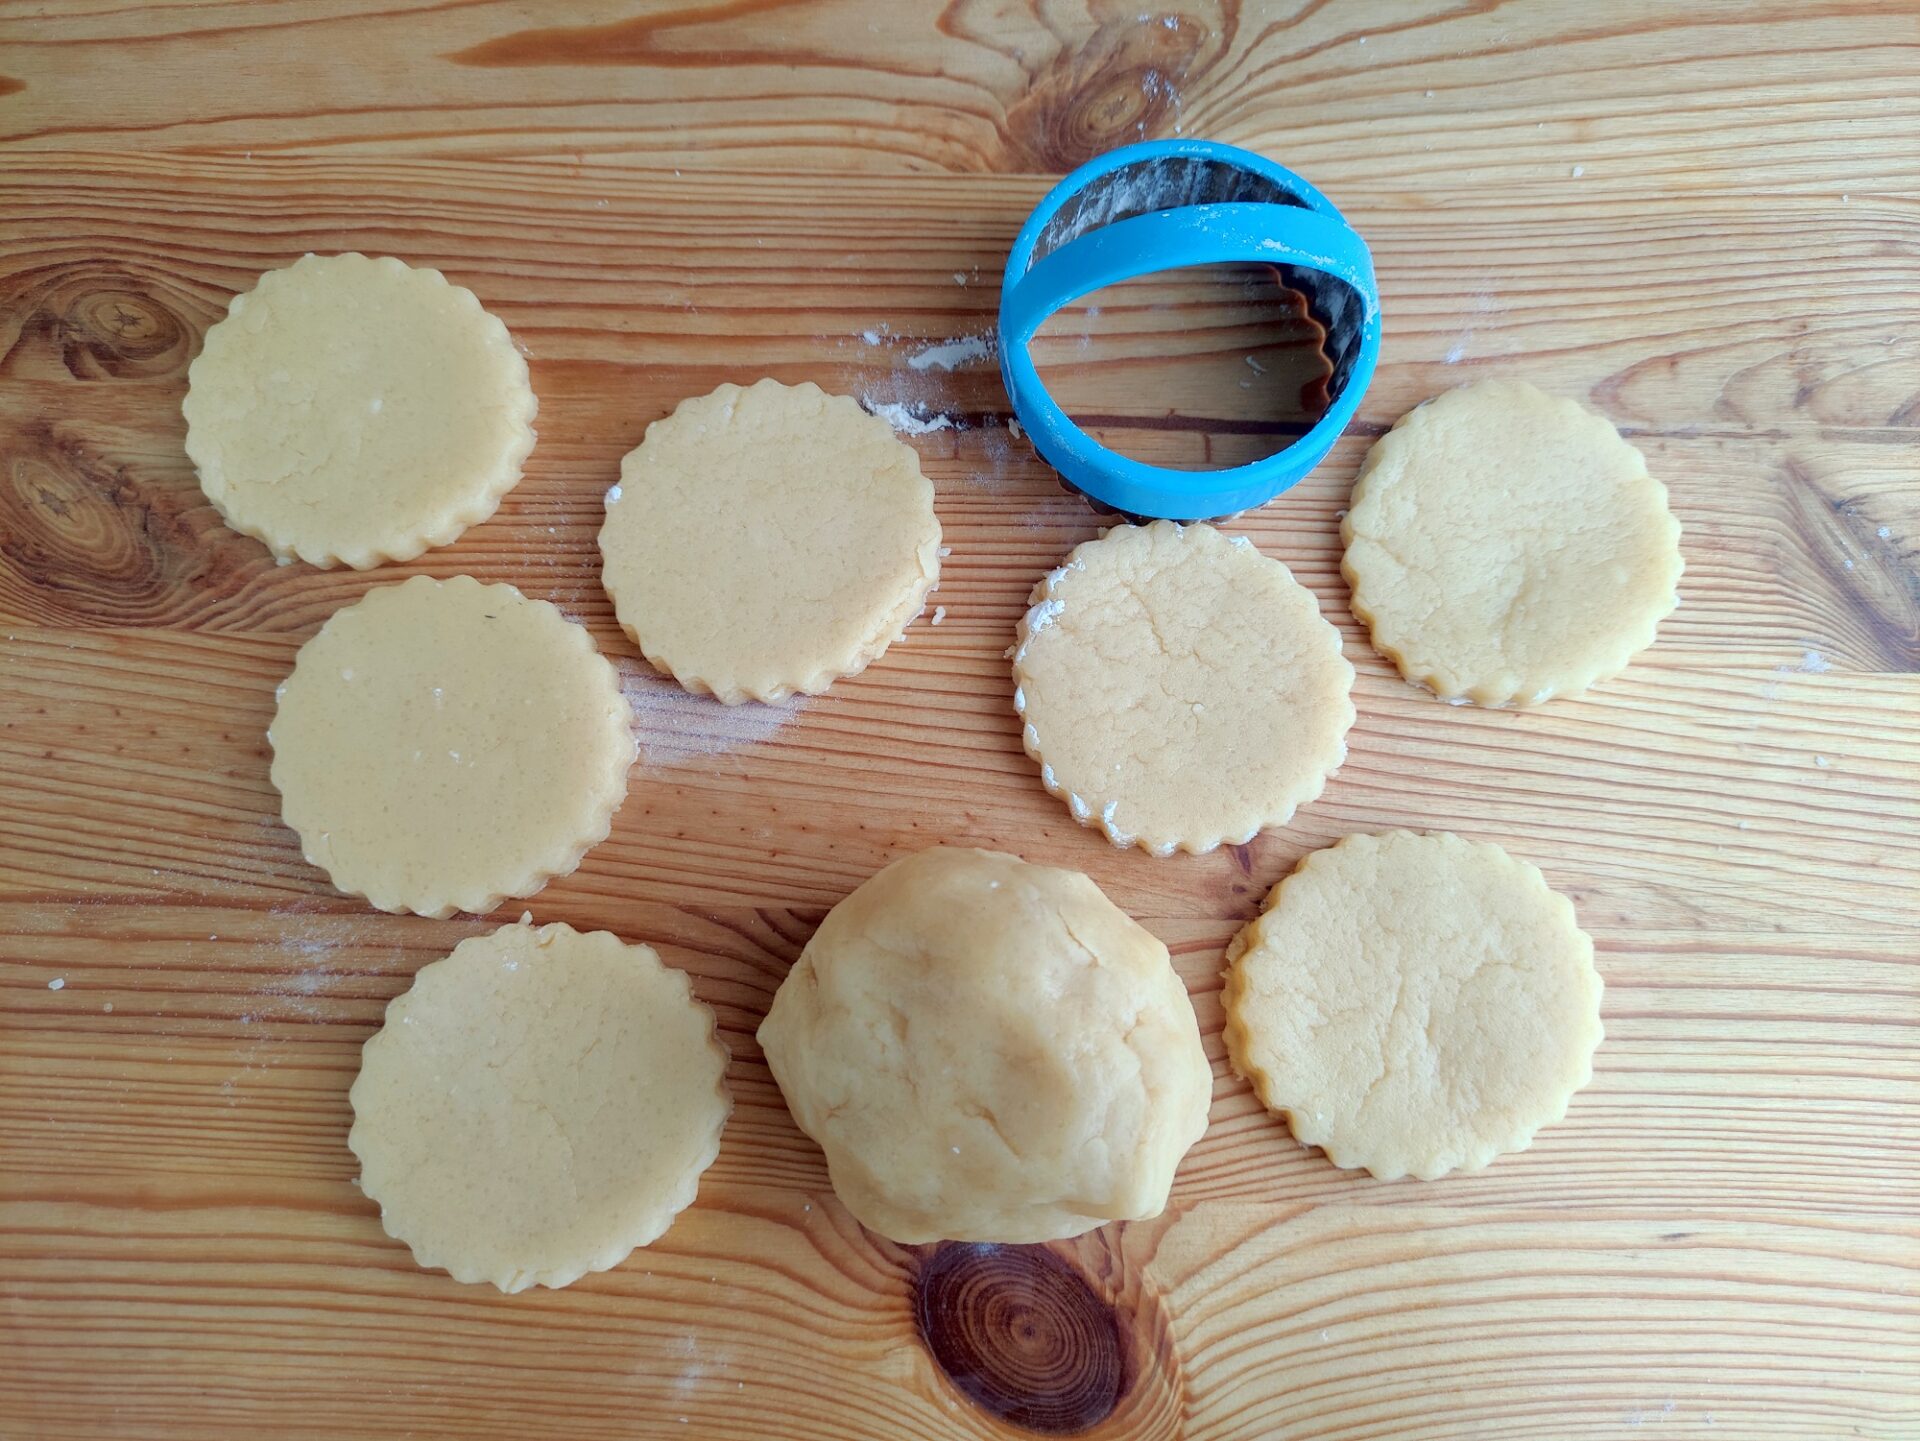 Cutting cookies into circles with a cookie cutter.